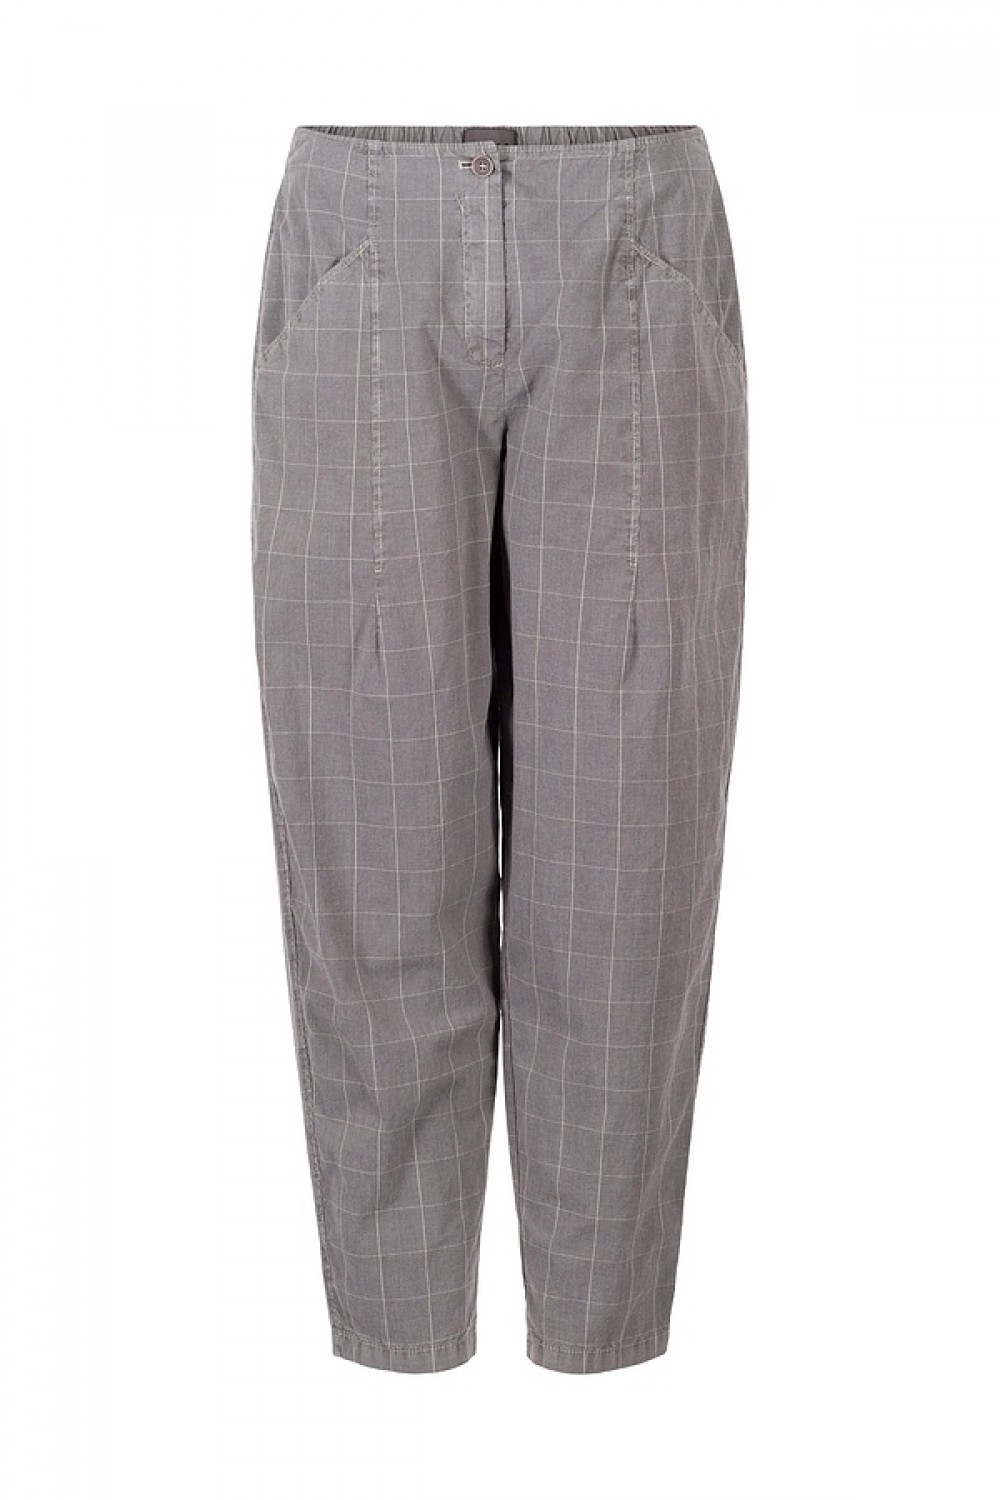 OSKA Trousers 418 / Cotton Stretch with Windowpane Check Silver